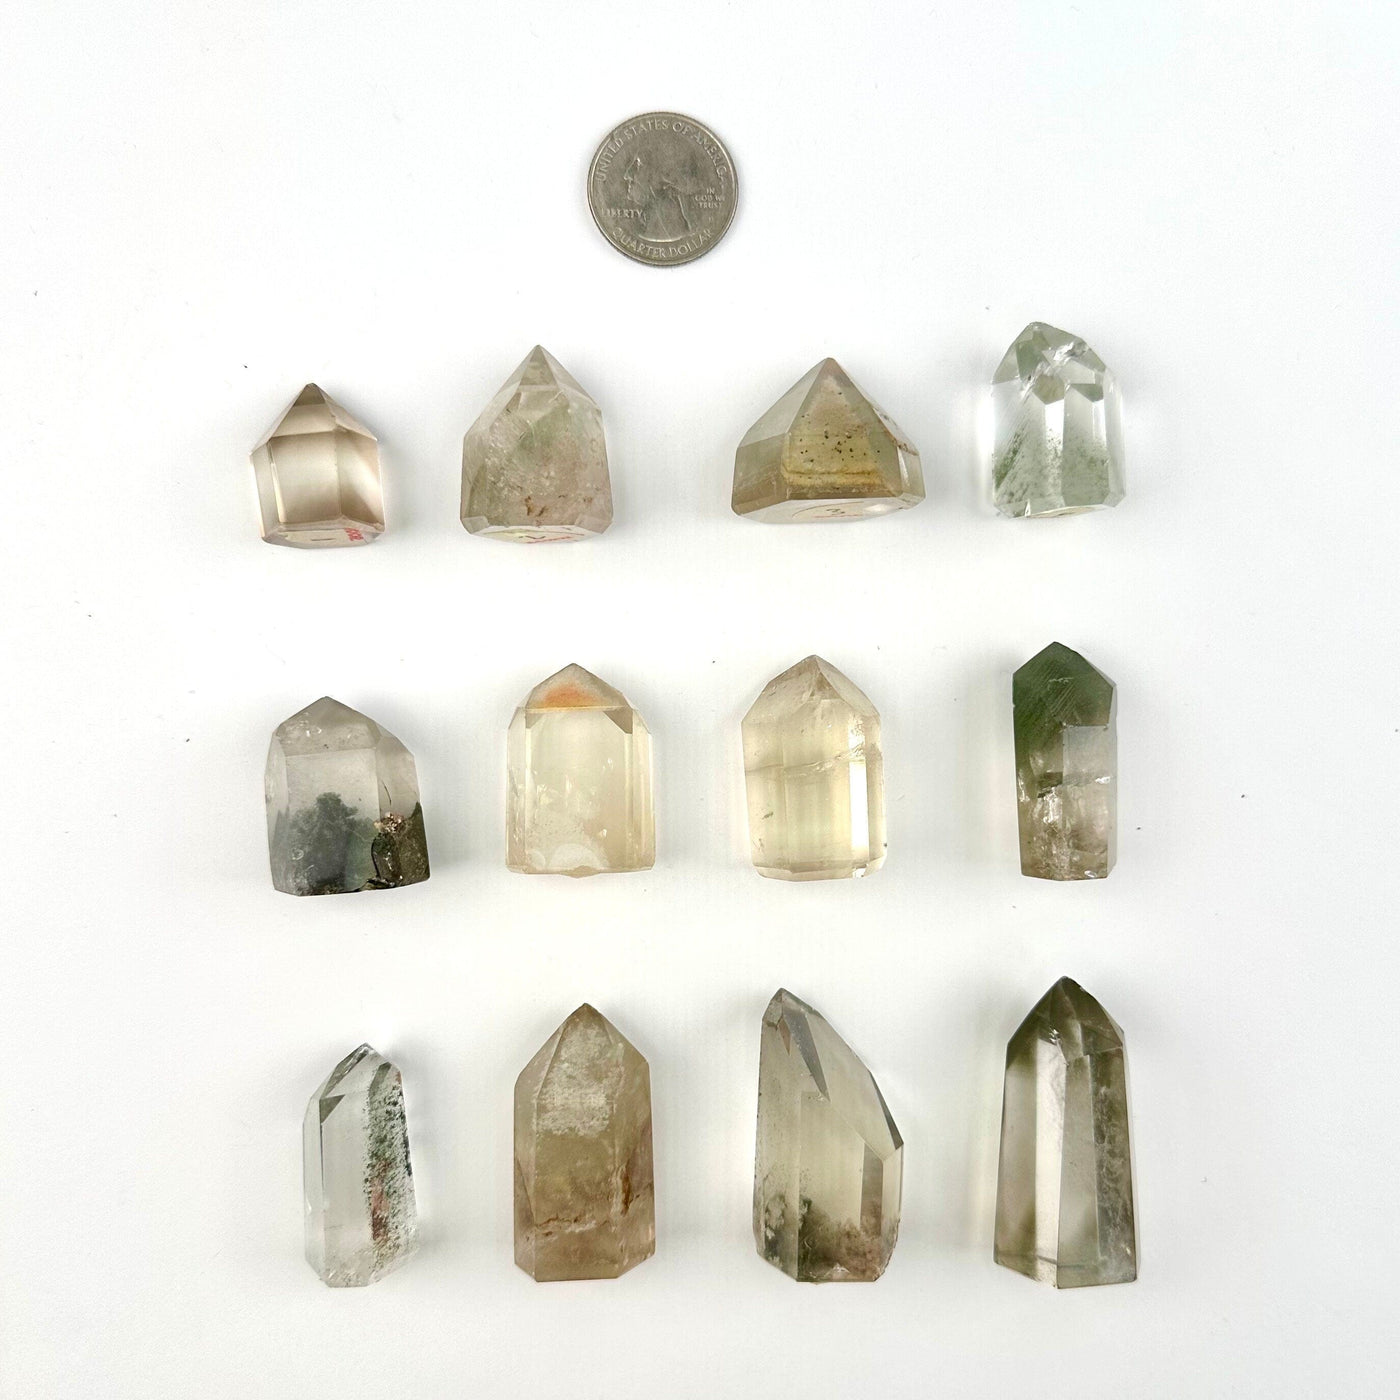 Crystal Quartz Points with Inclusions - Small Crystals - You Choose all variants with quarter for size reference